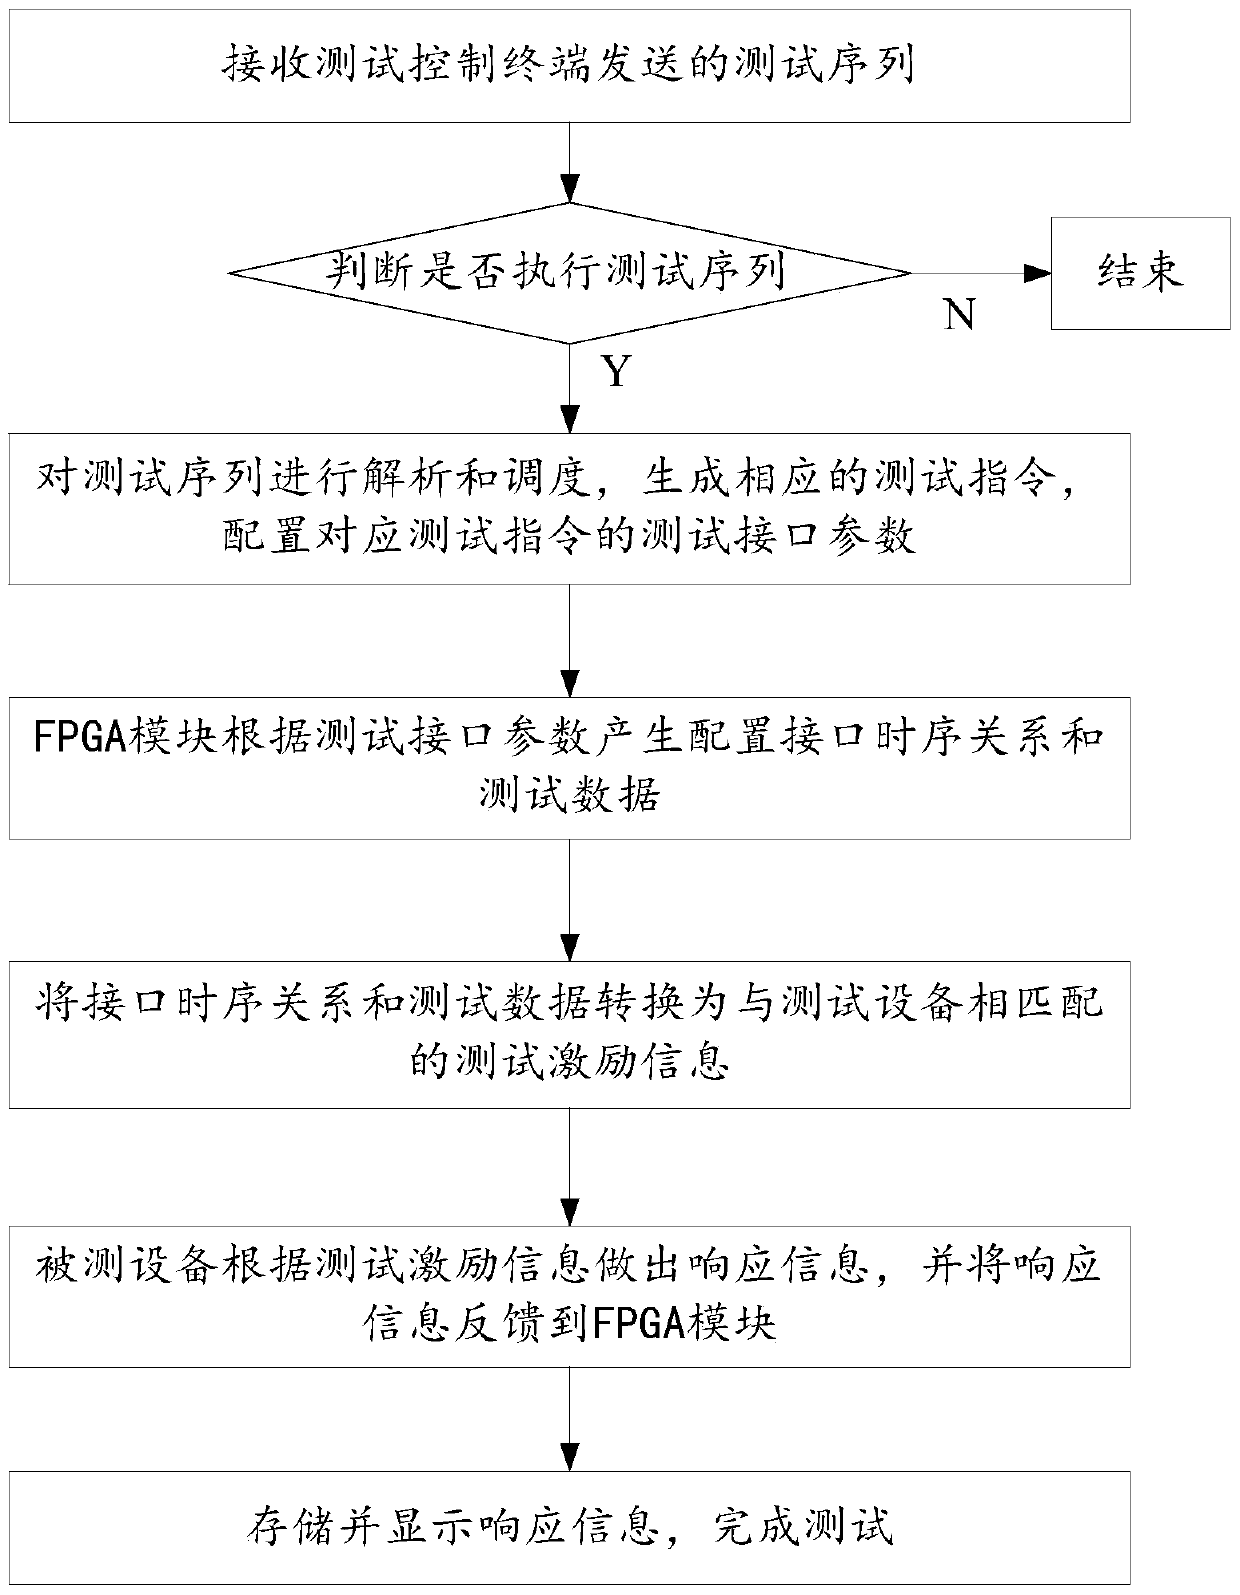 Method and system for testing software configuration items